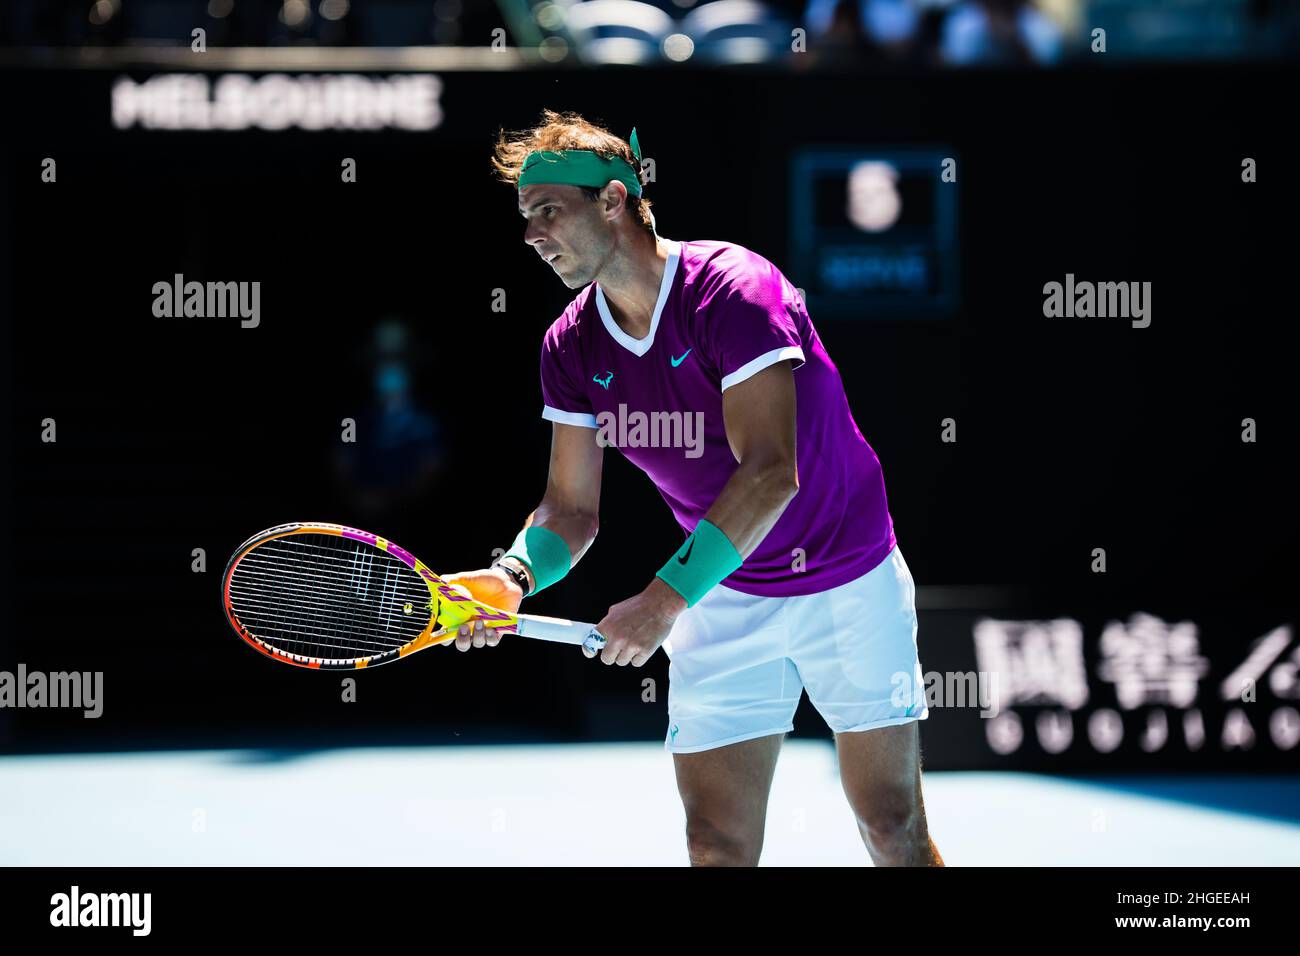 Rafael Nadal in action during the Australian Open 2022 Round 1 match of the Grand Slam at Rod Laver Arena in Melbourne Olympic Park.(Final score Nadal wins in 3 sets 61, 64, 62 Stock Photo